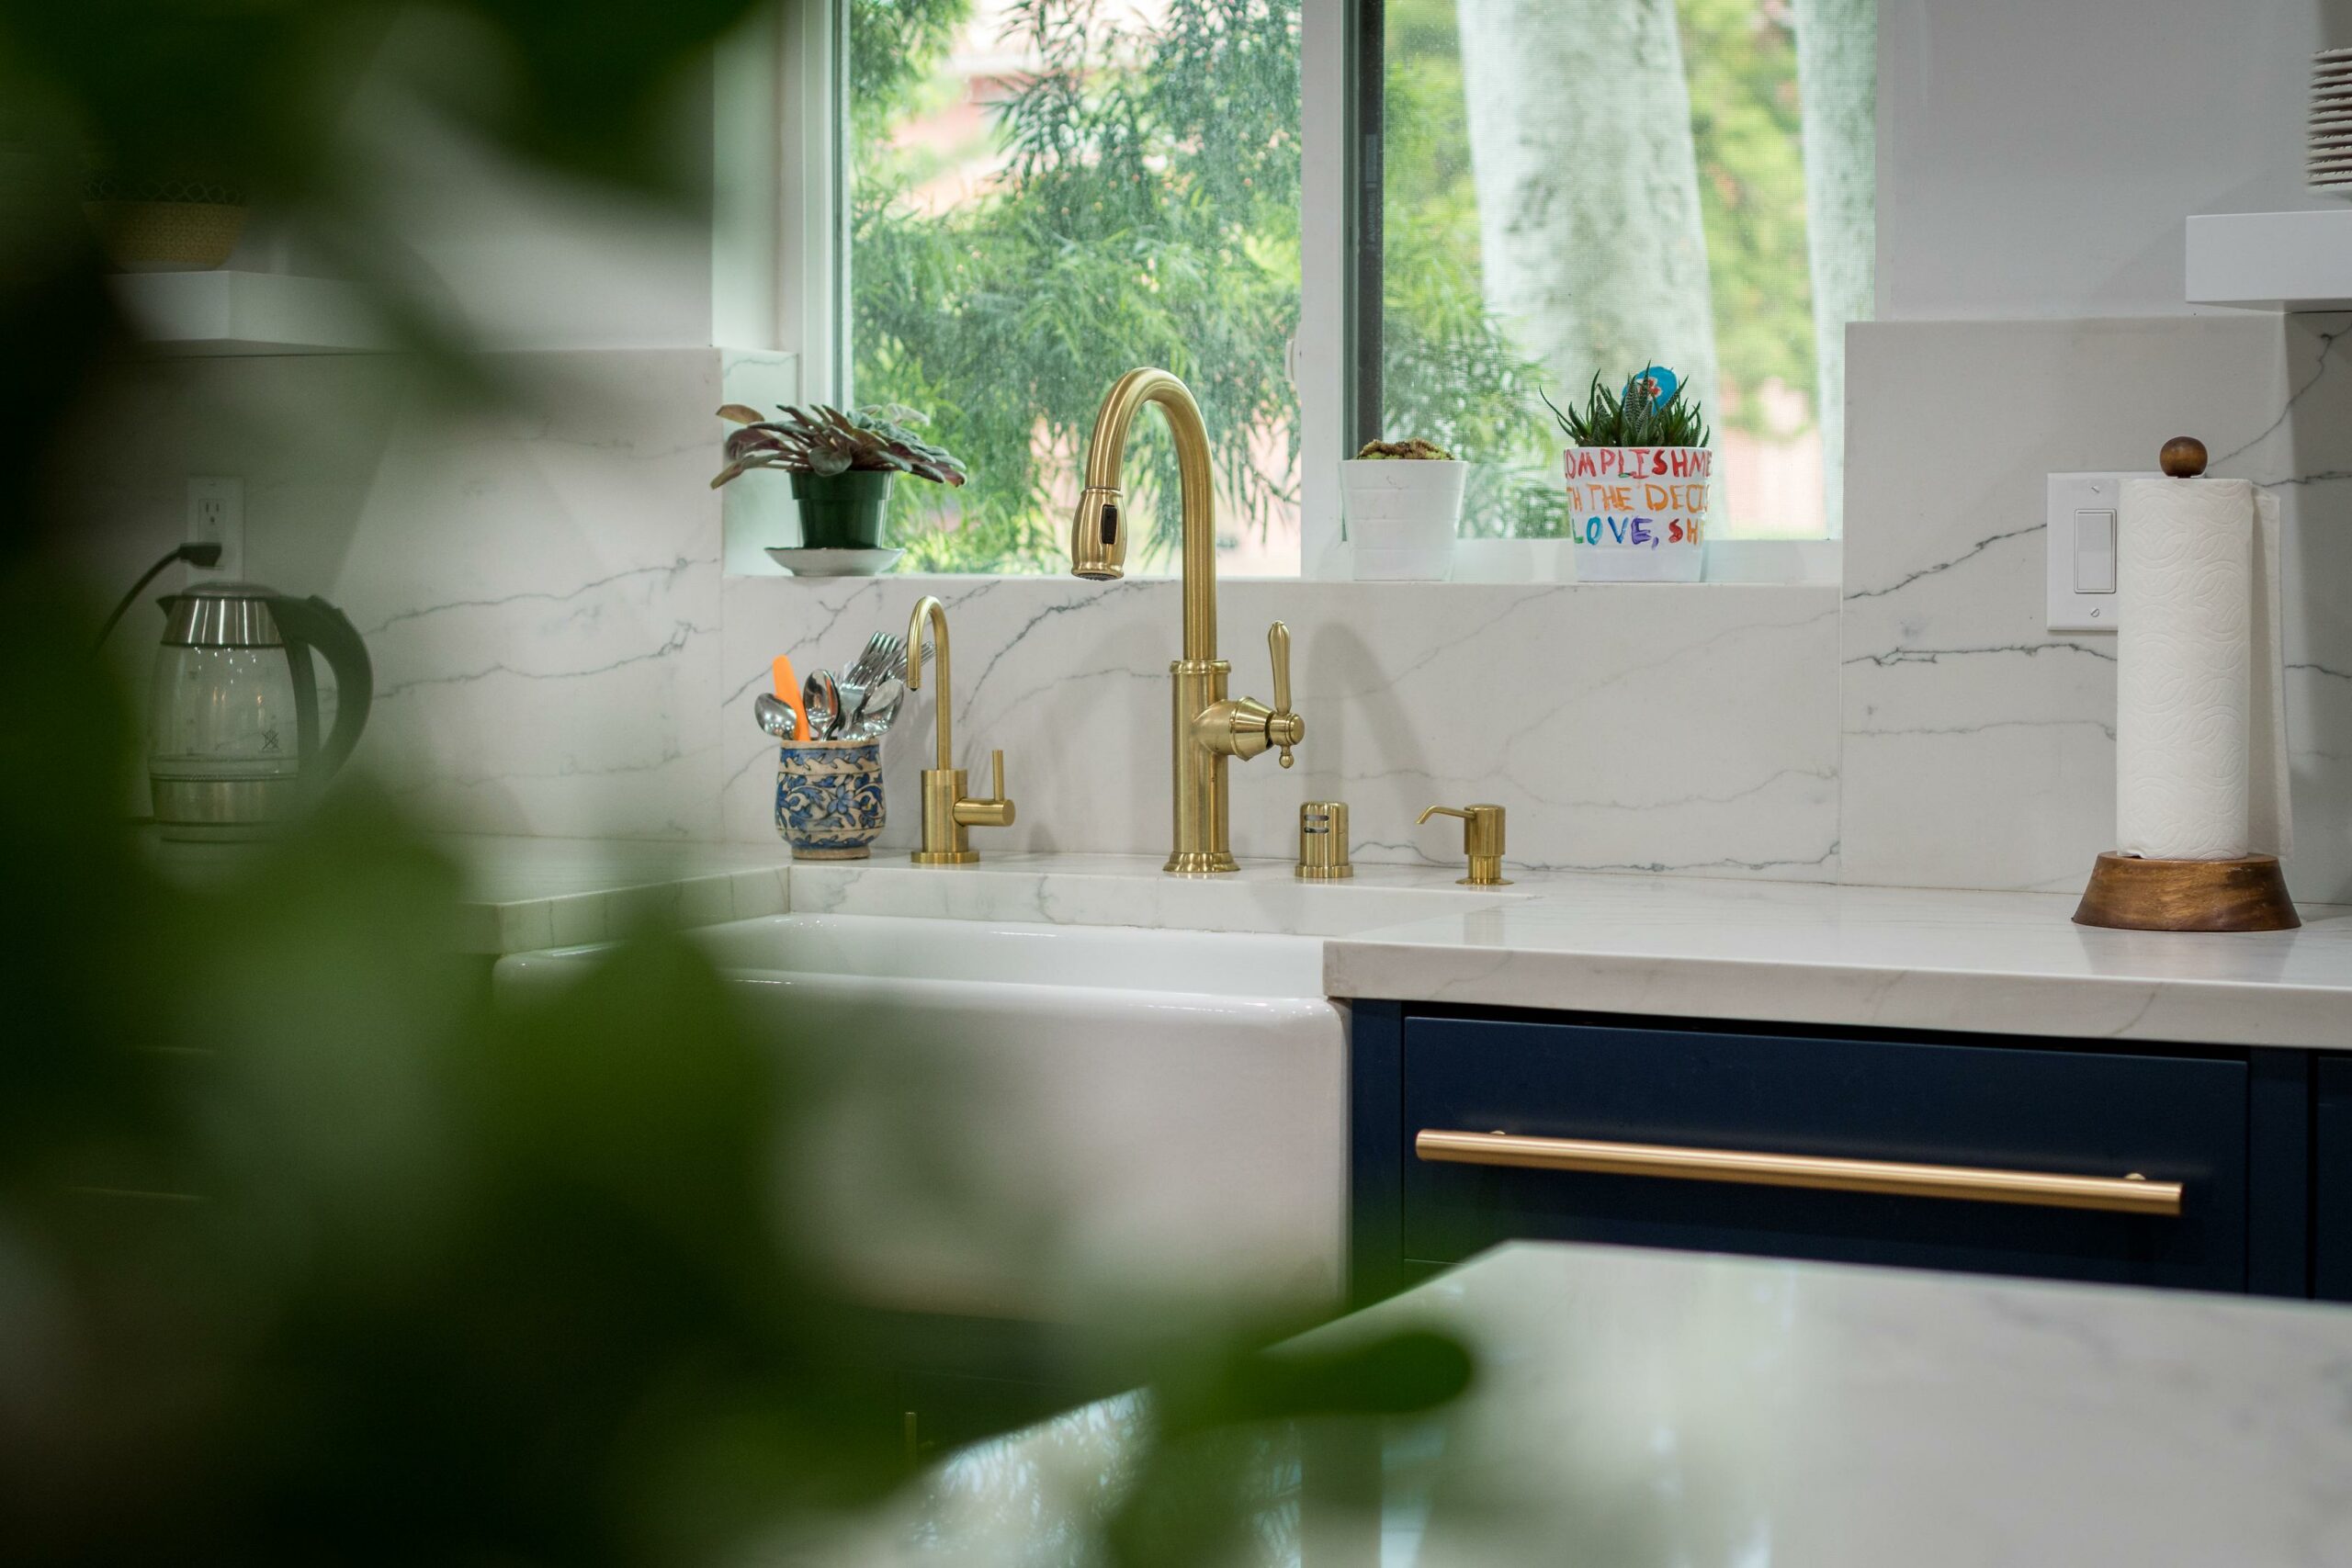 Modern kitchen sink with gold faucet and greenery outside.